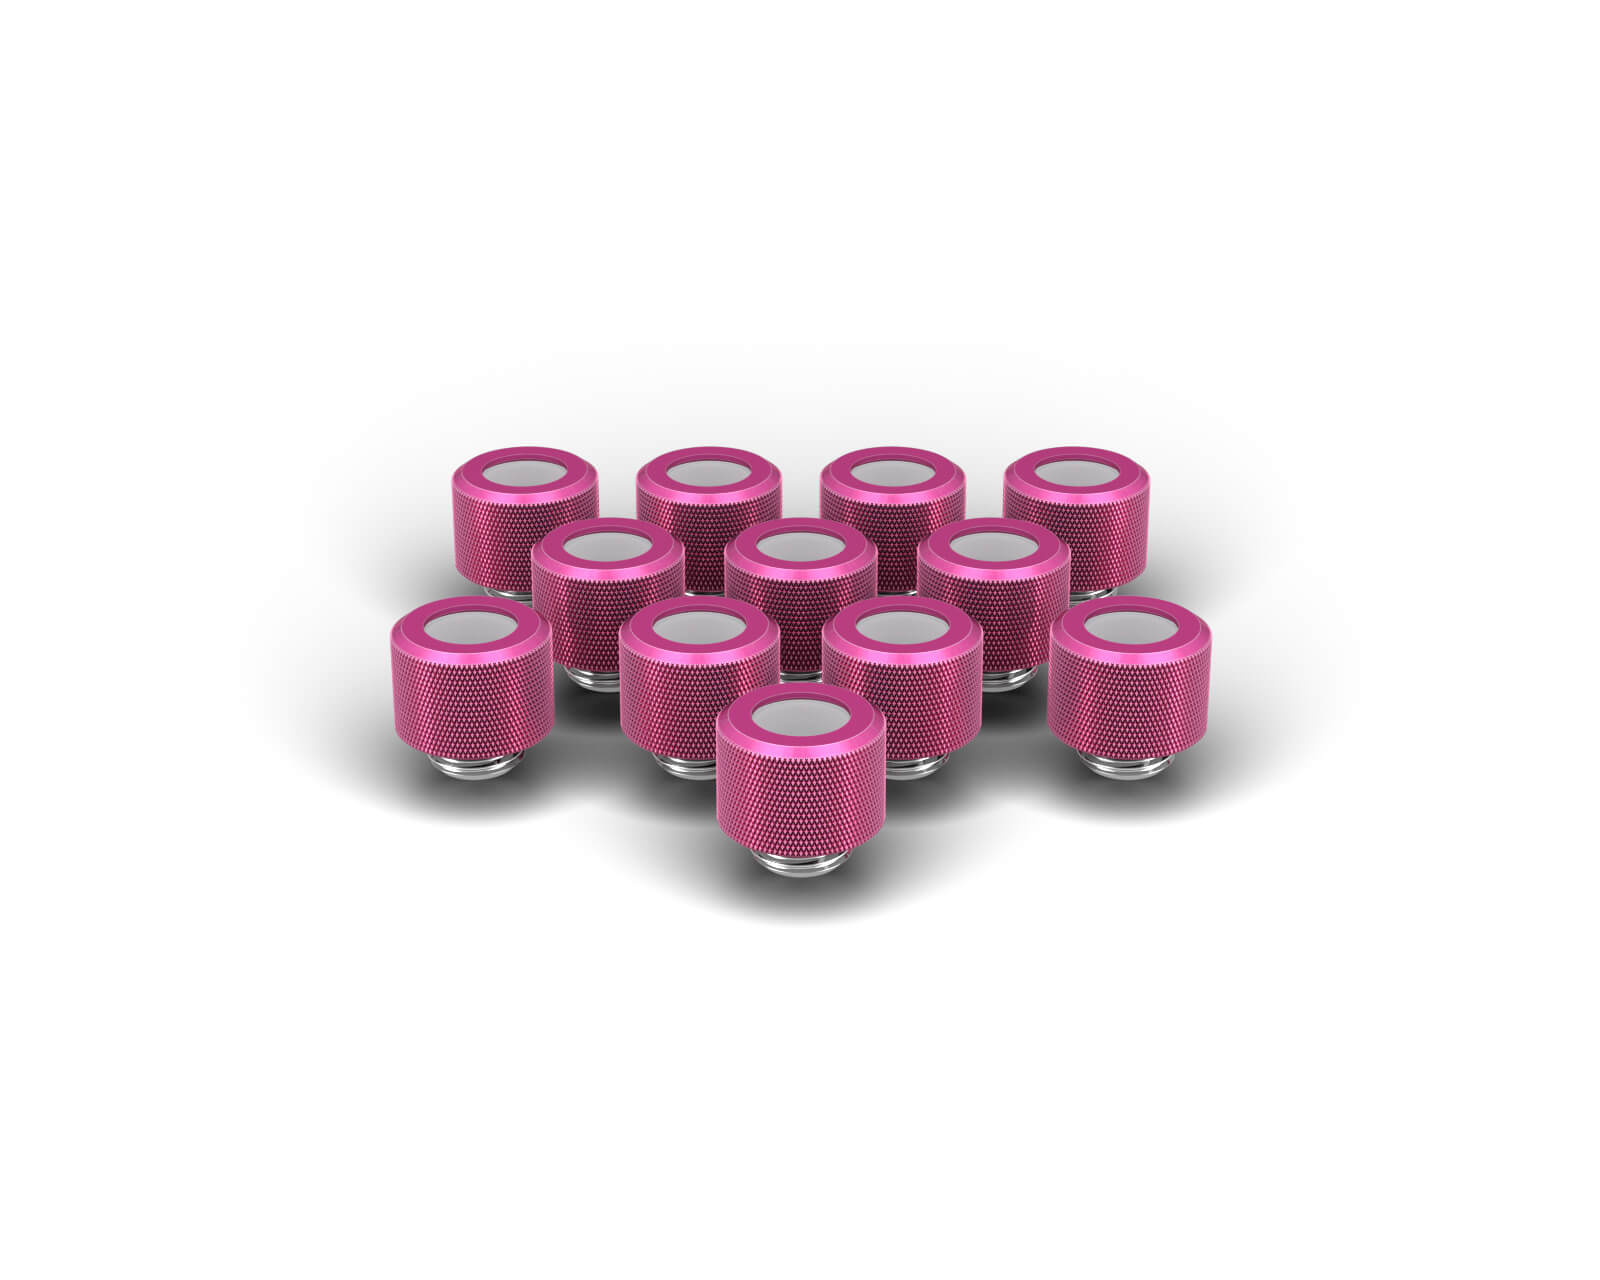 PrimoChill 12mm OD Rigid SX Fitting - 12 Pack - PrimoChill - KEEPING IT COOL Candy Pink